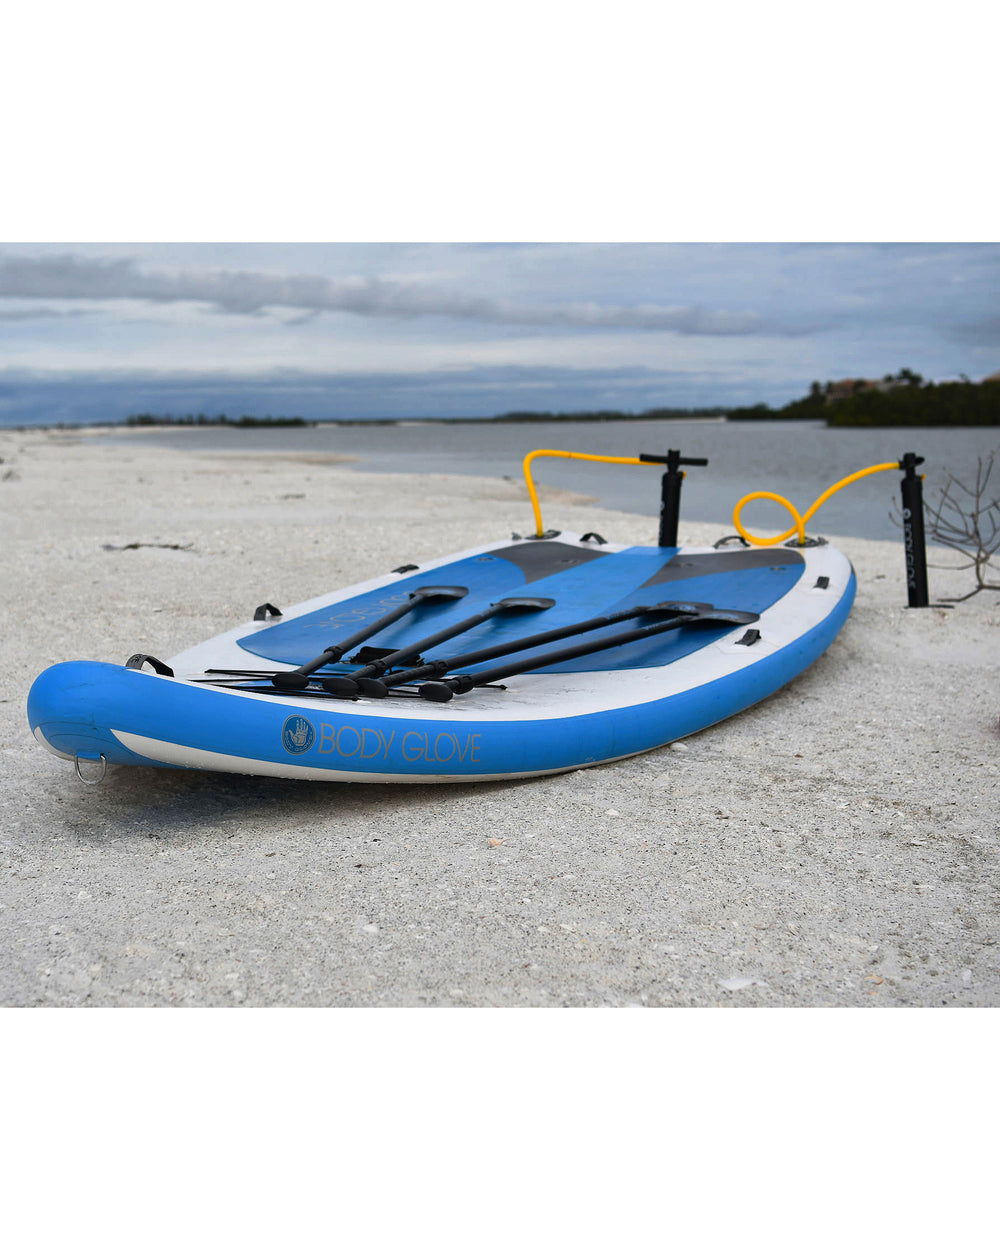 Crusader 15' Multi-Person Inflatable Paddle Board - Cobalt/White